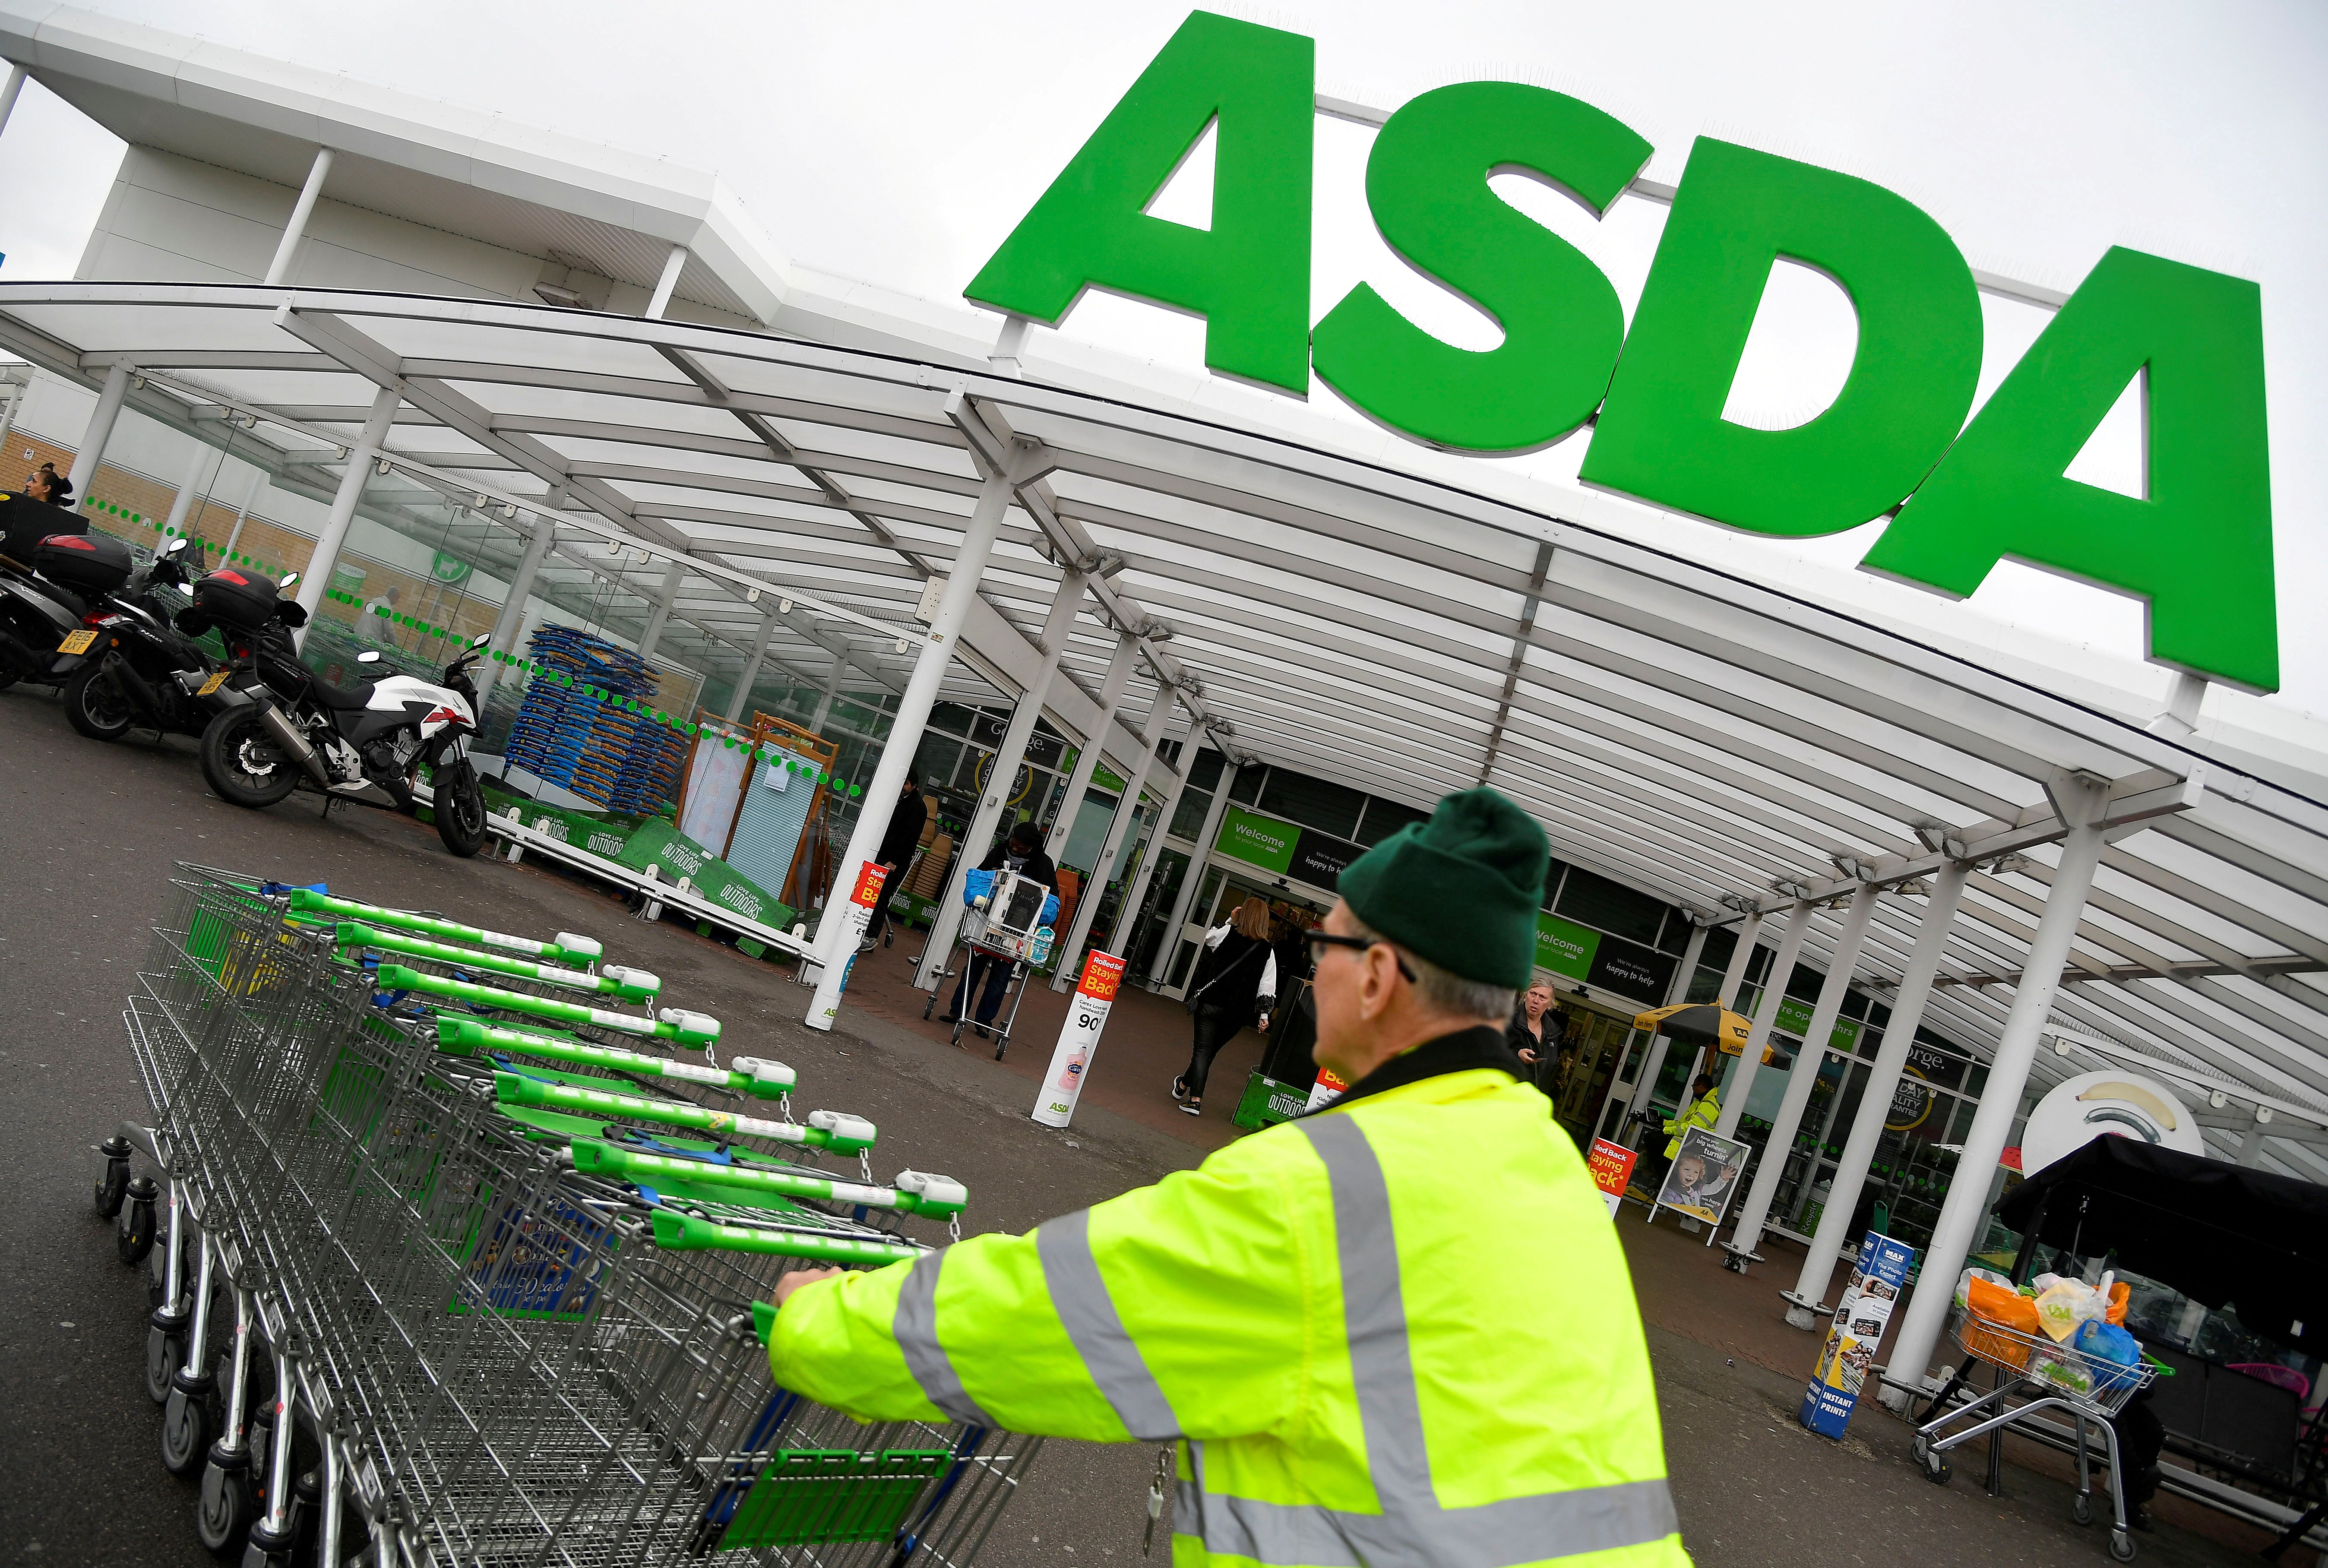 For the first time in two decades Asda will be under British ownership